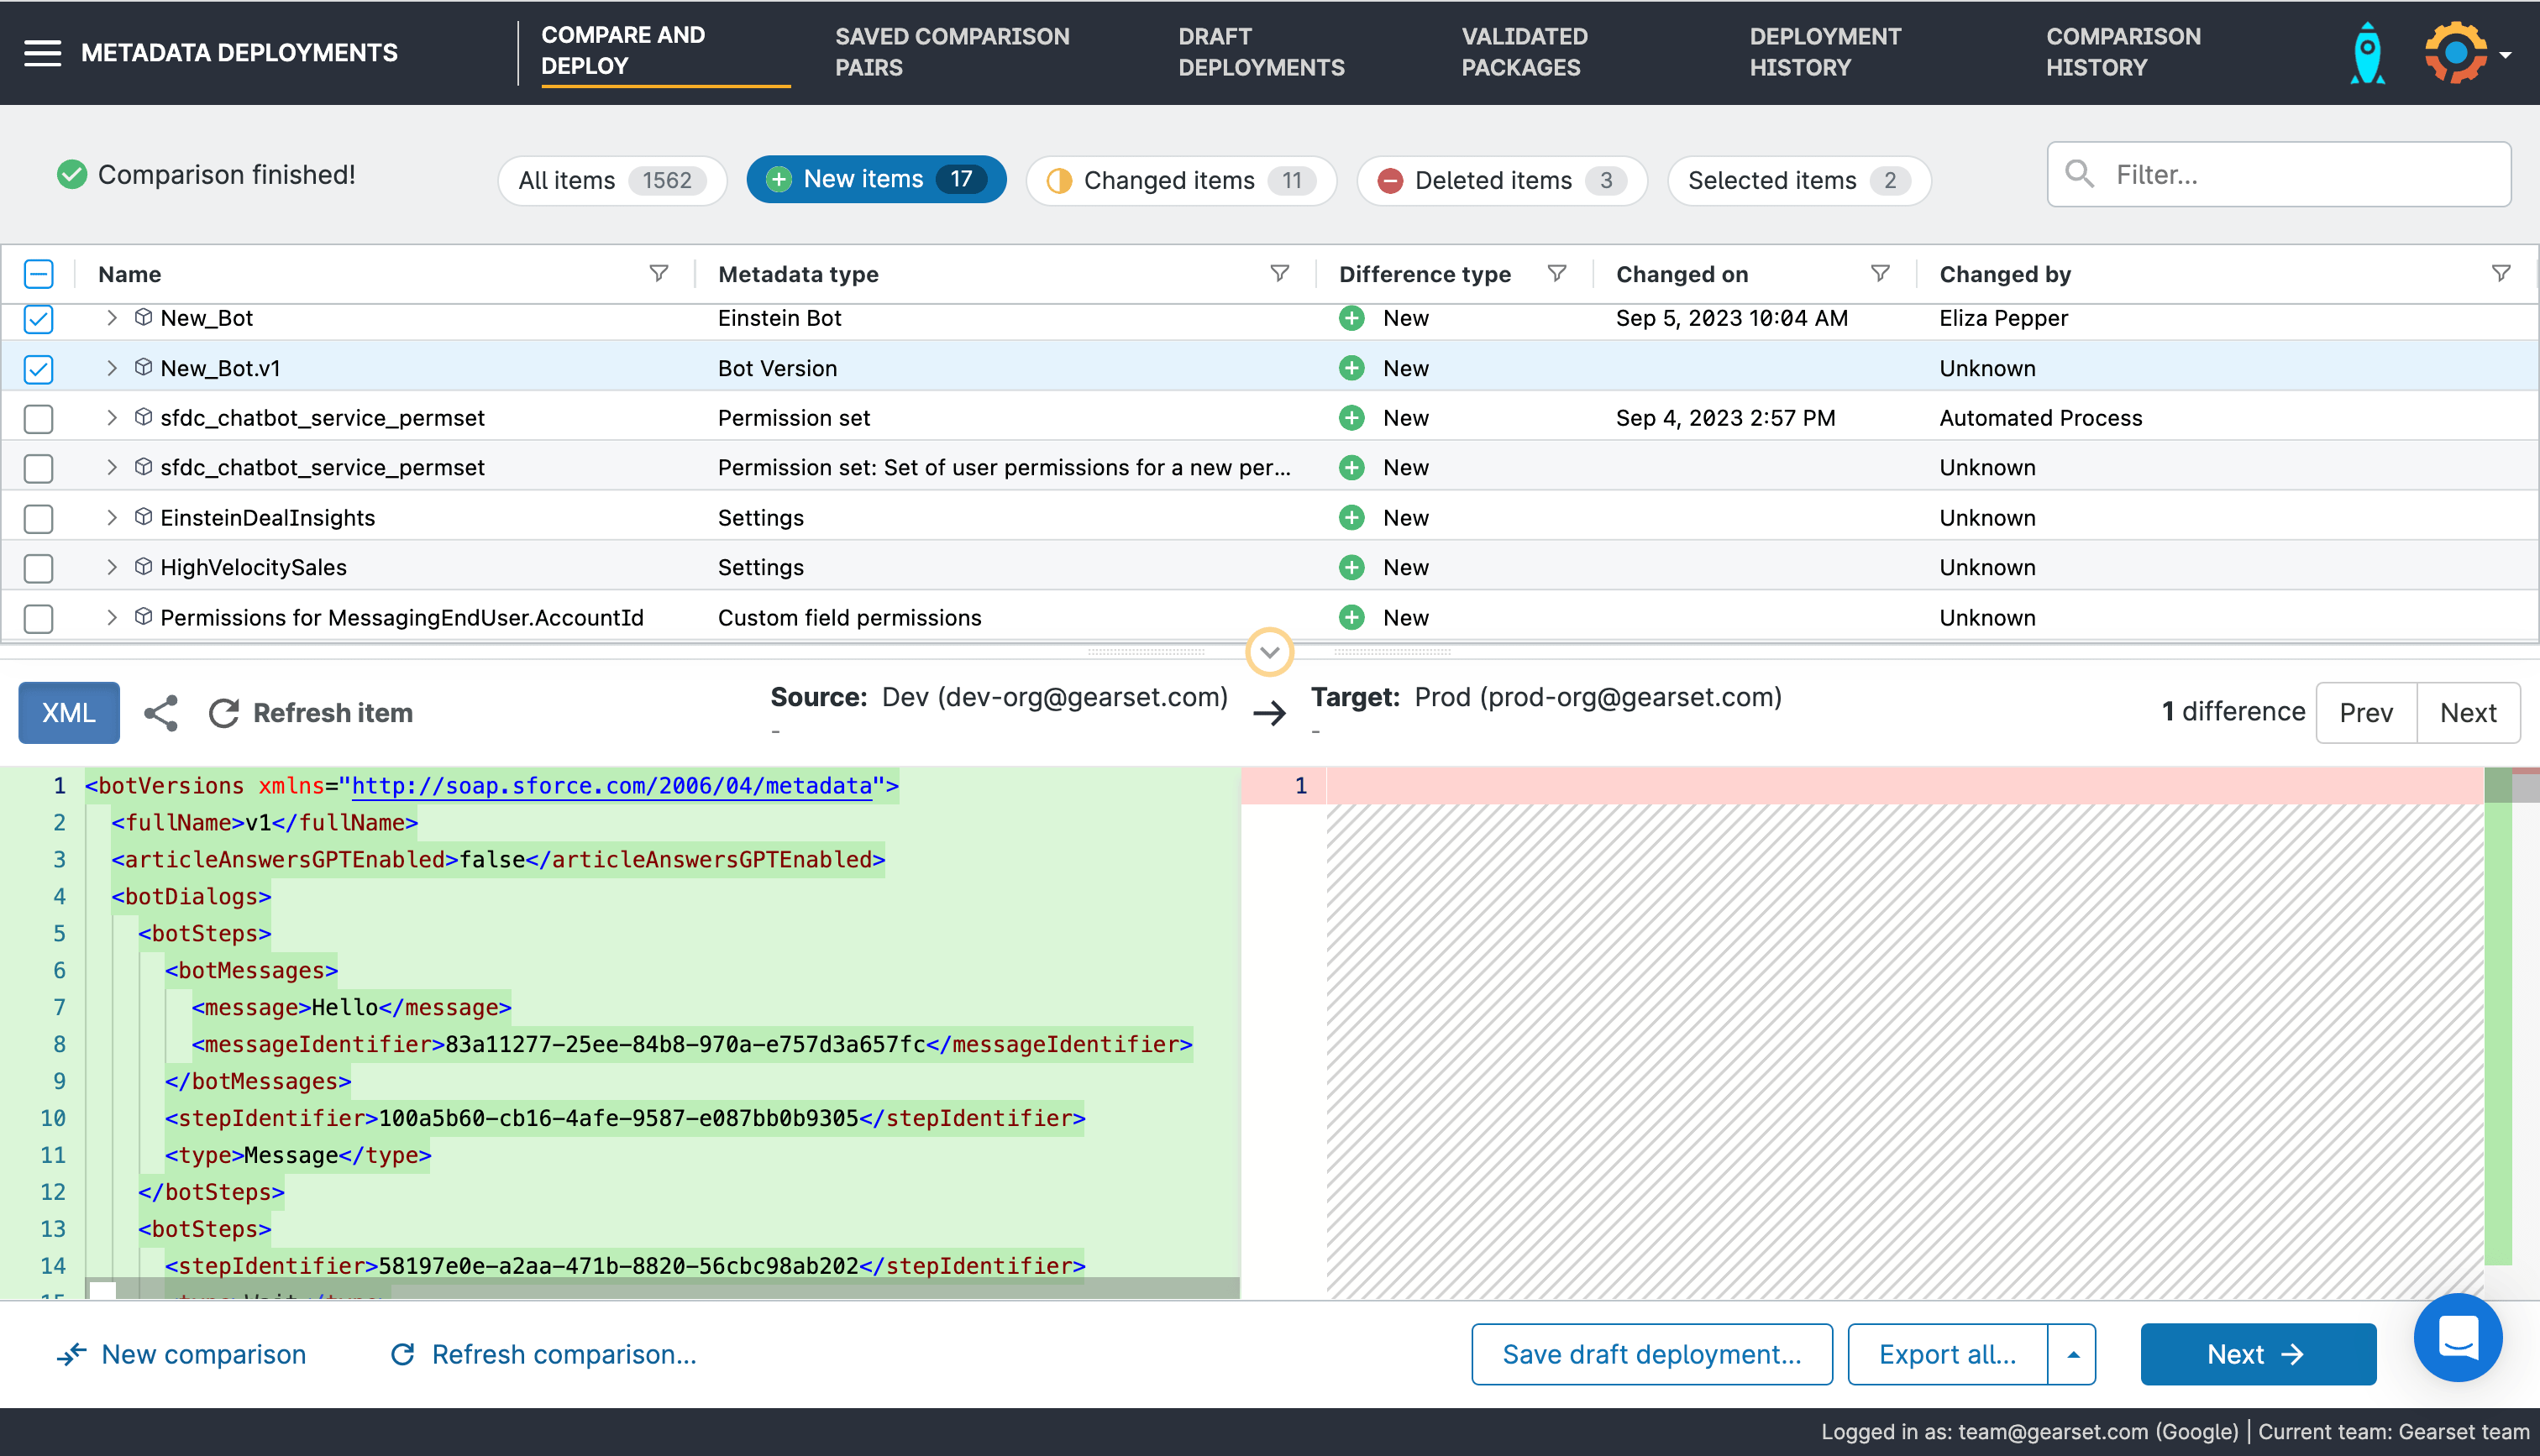 Screen showing Einstein bot highlighted as a new metadata type within Gearset's smart comparison engine.